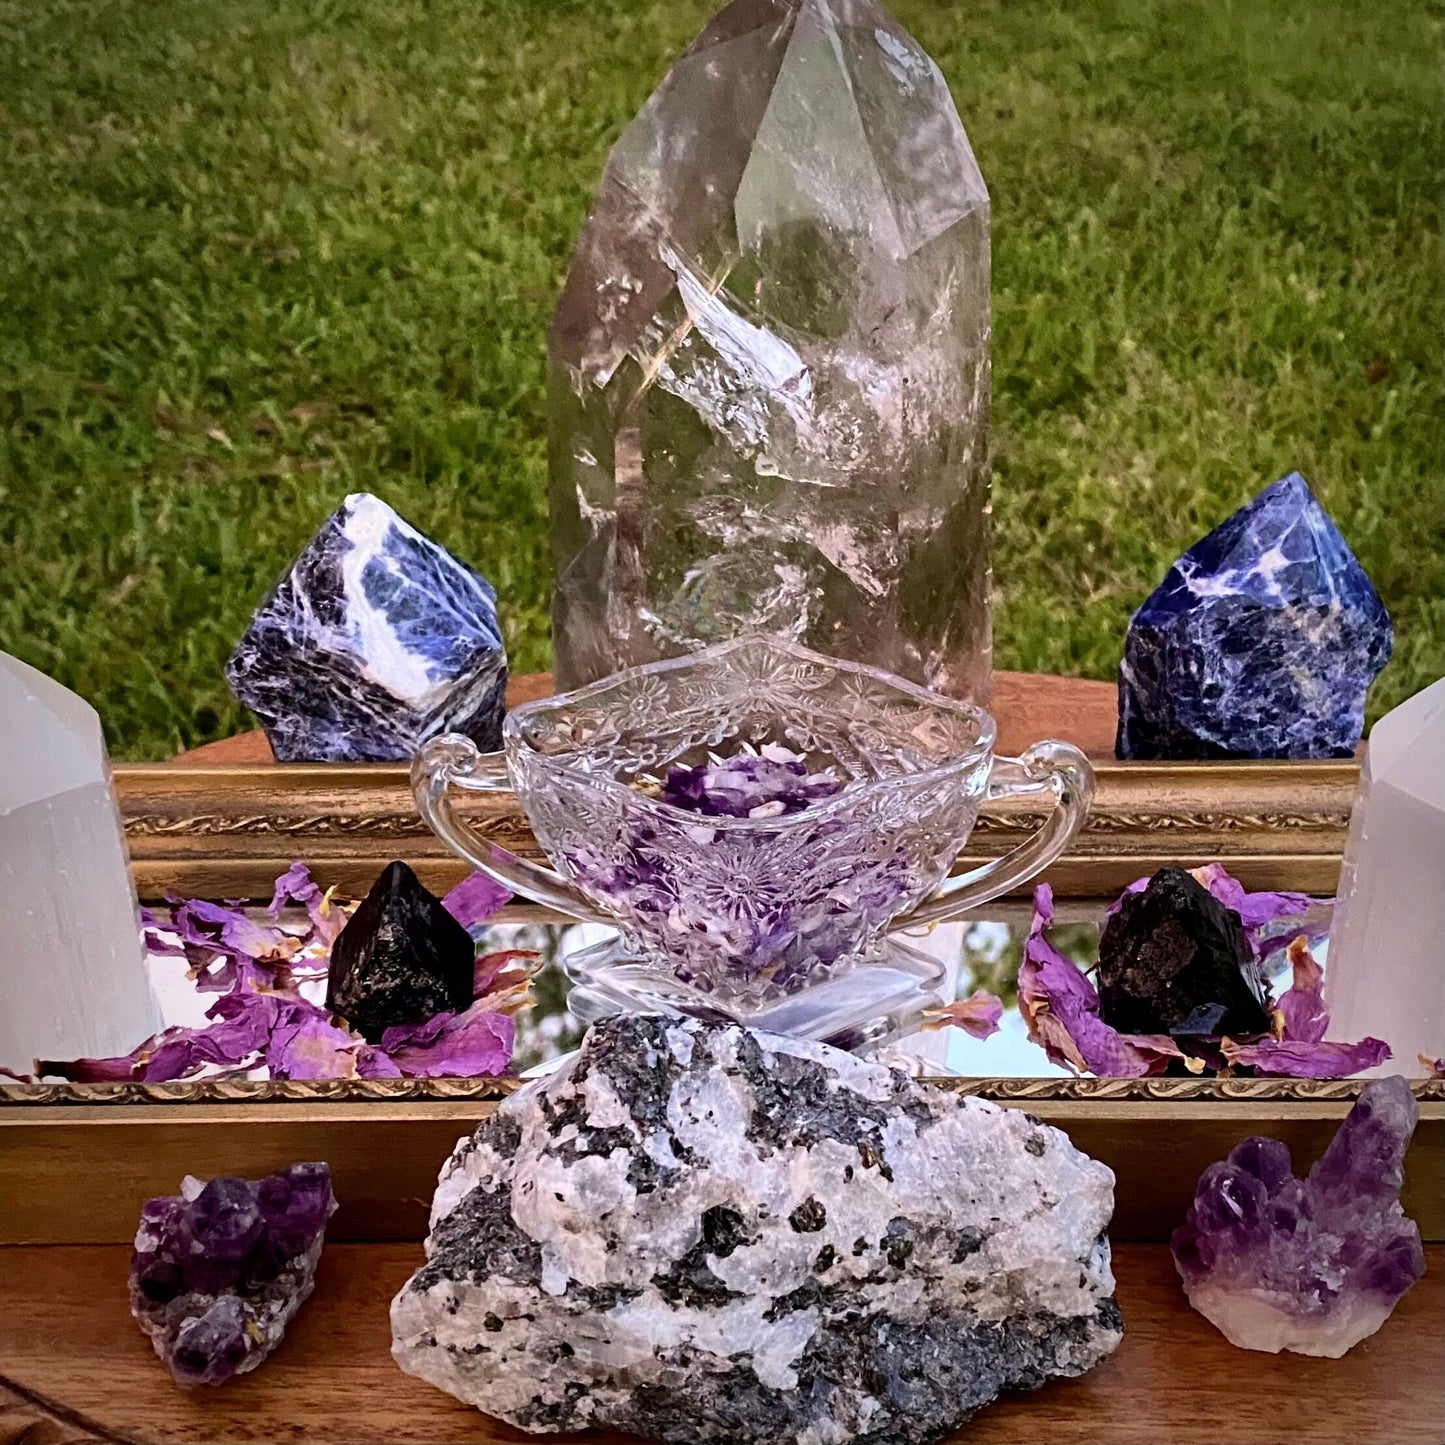 Aura Protection Dream - your shield against negative energies aiming to tarnish your aura